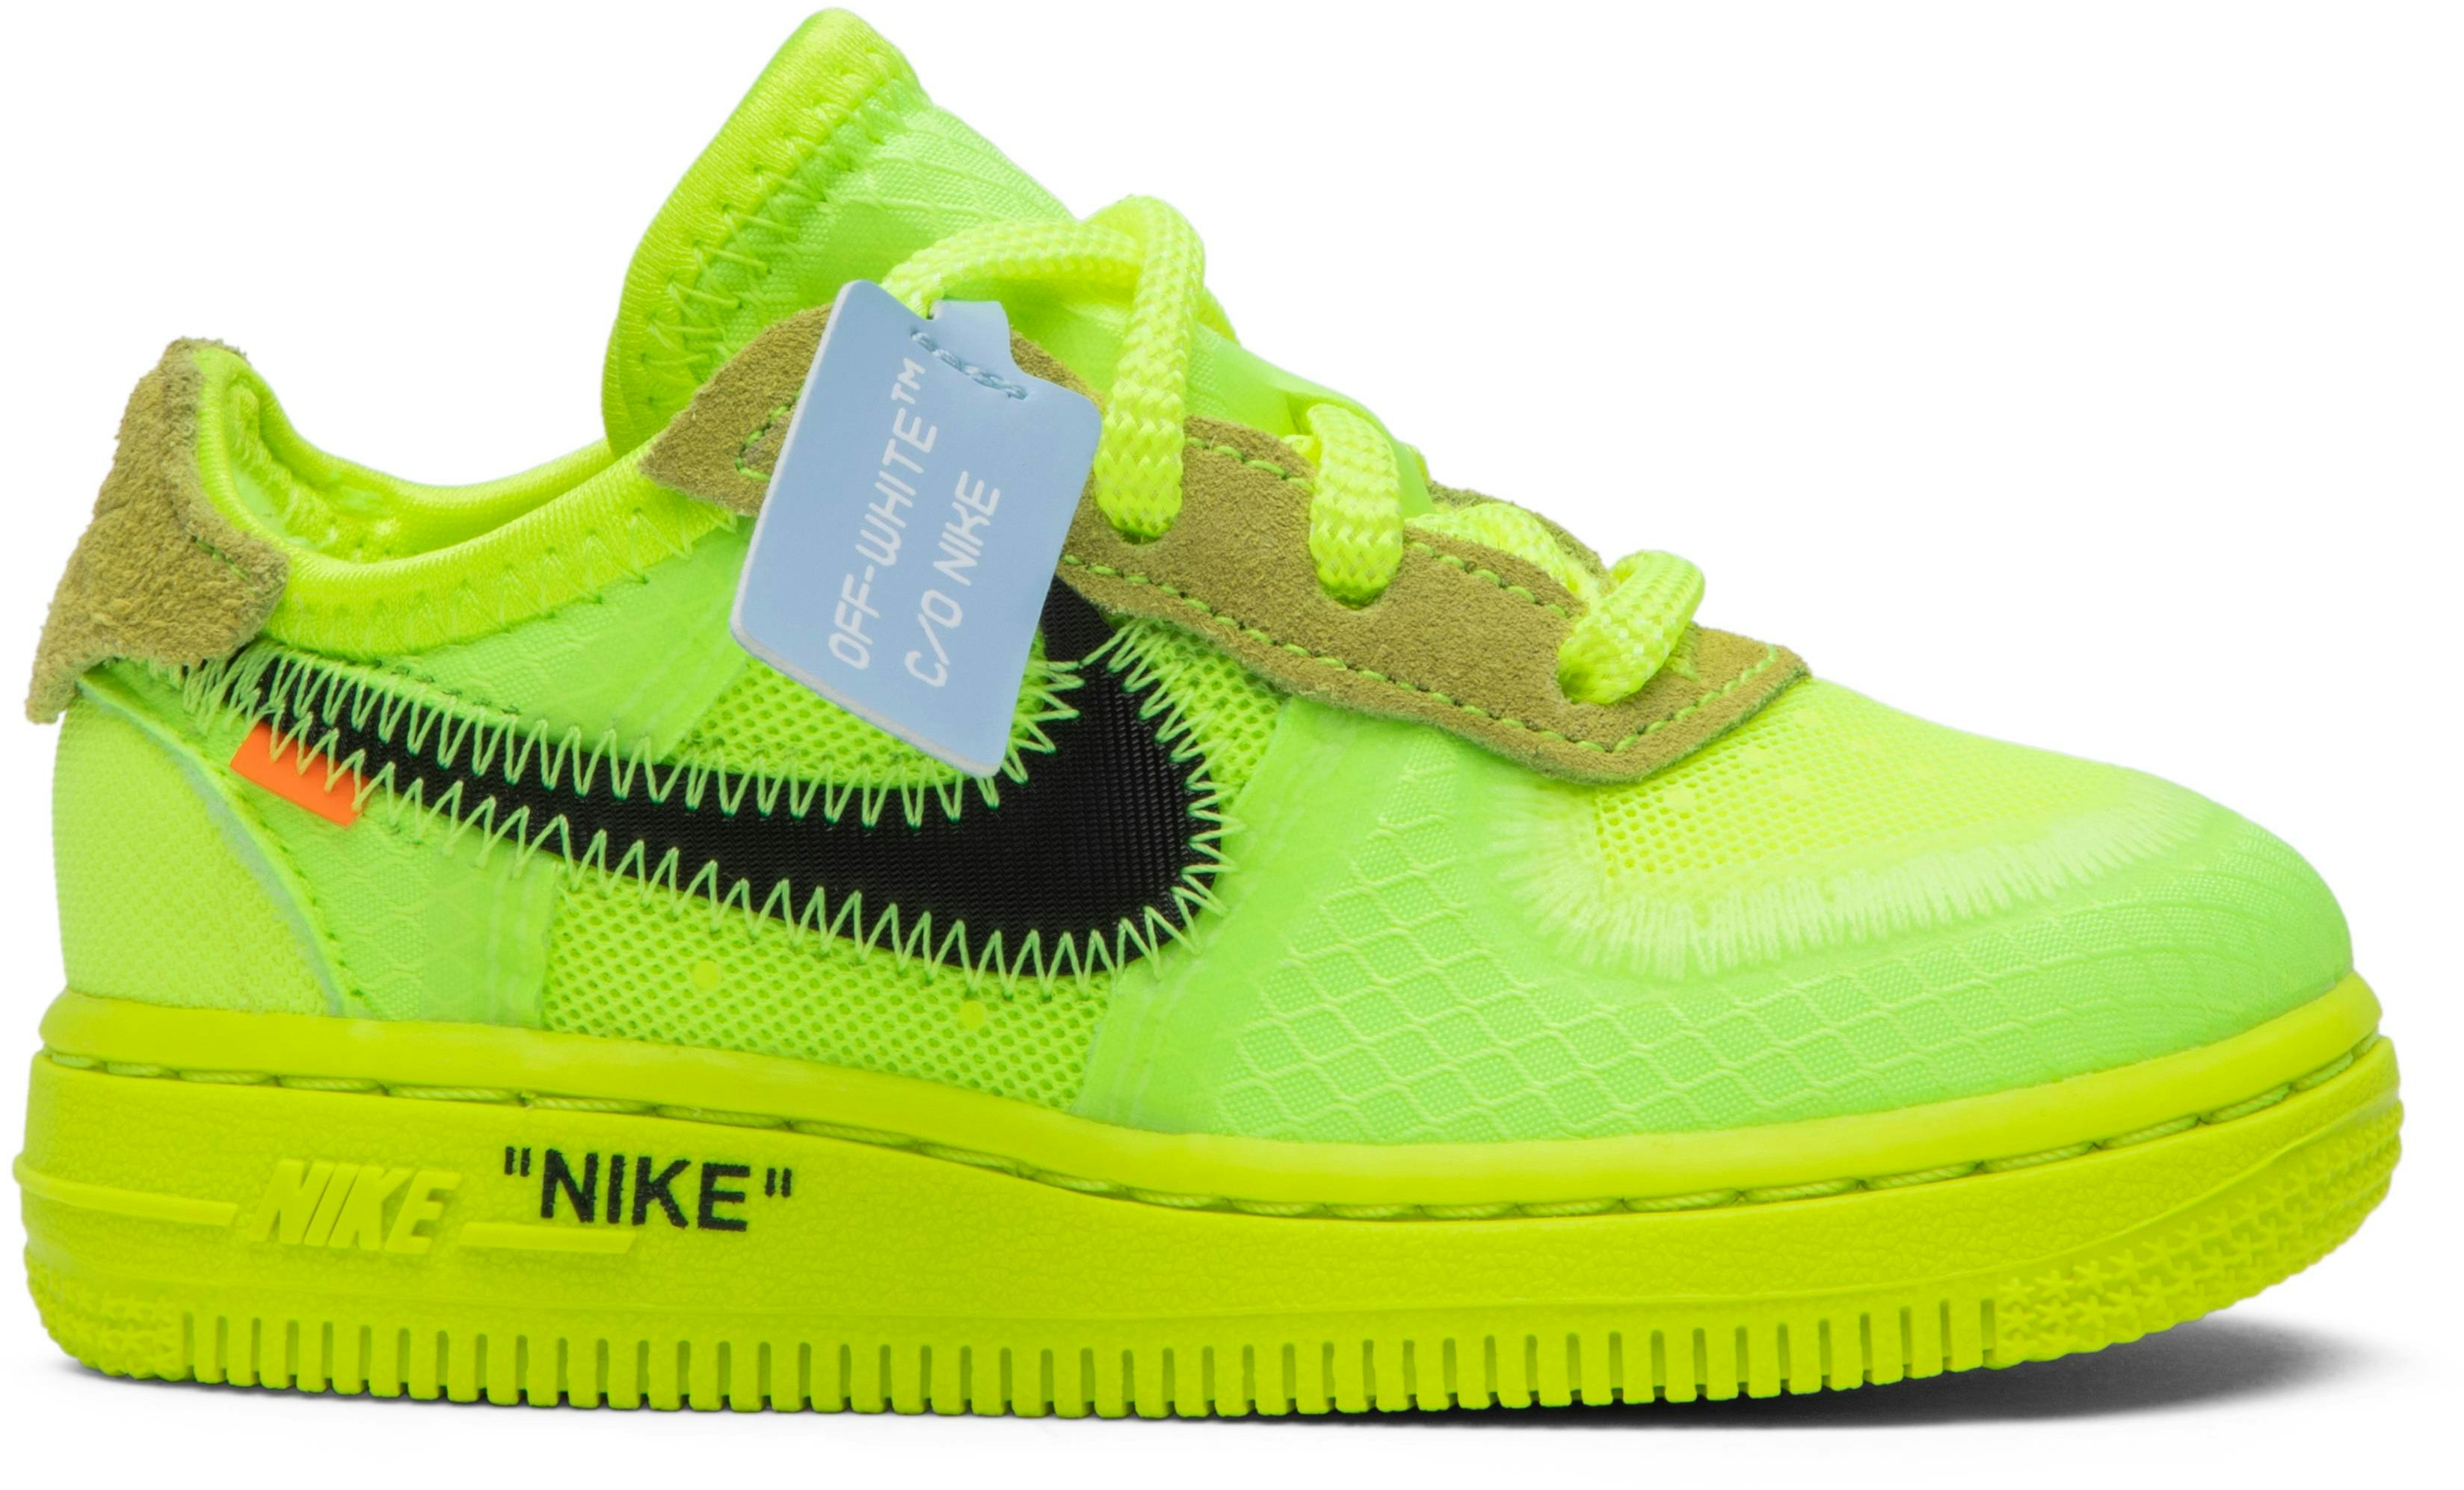 NIKE AIR FORCE 1 LOW x OFF-WHITE VOLT